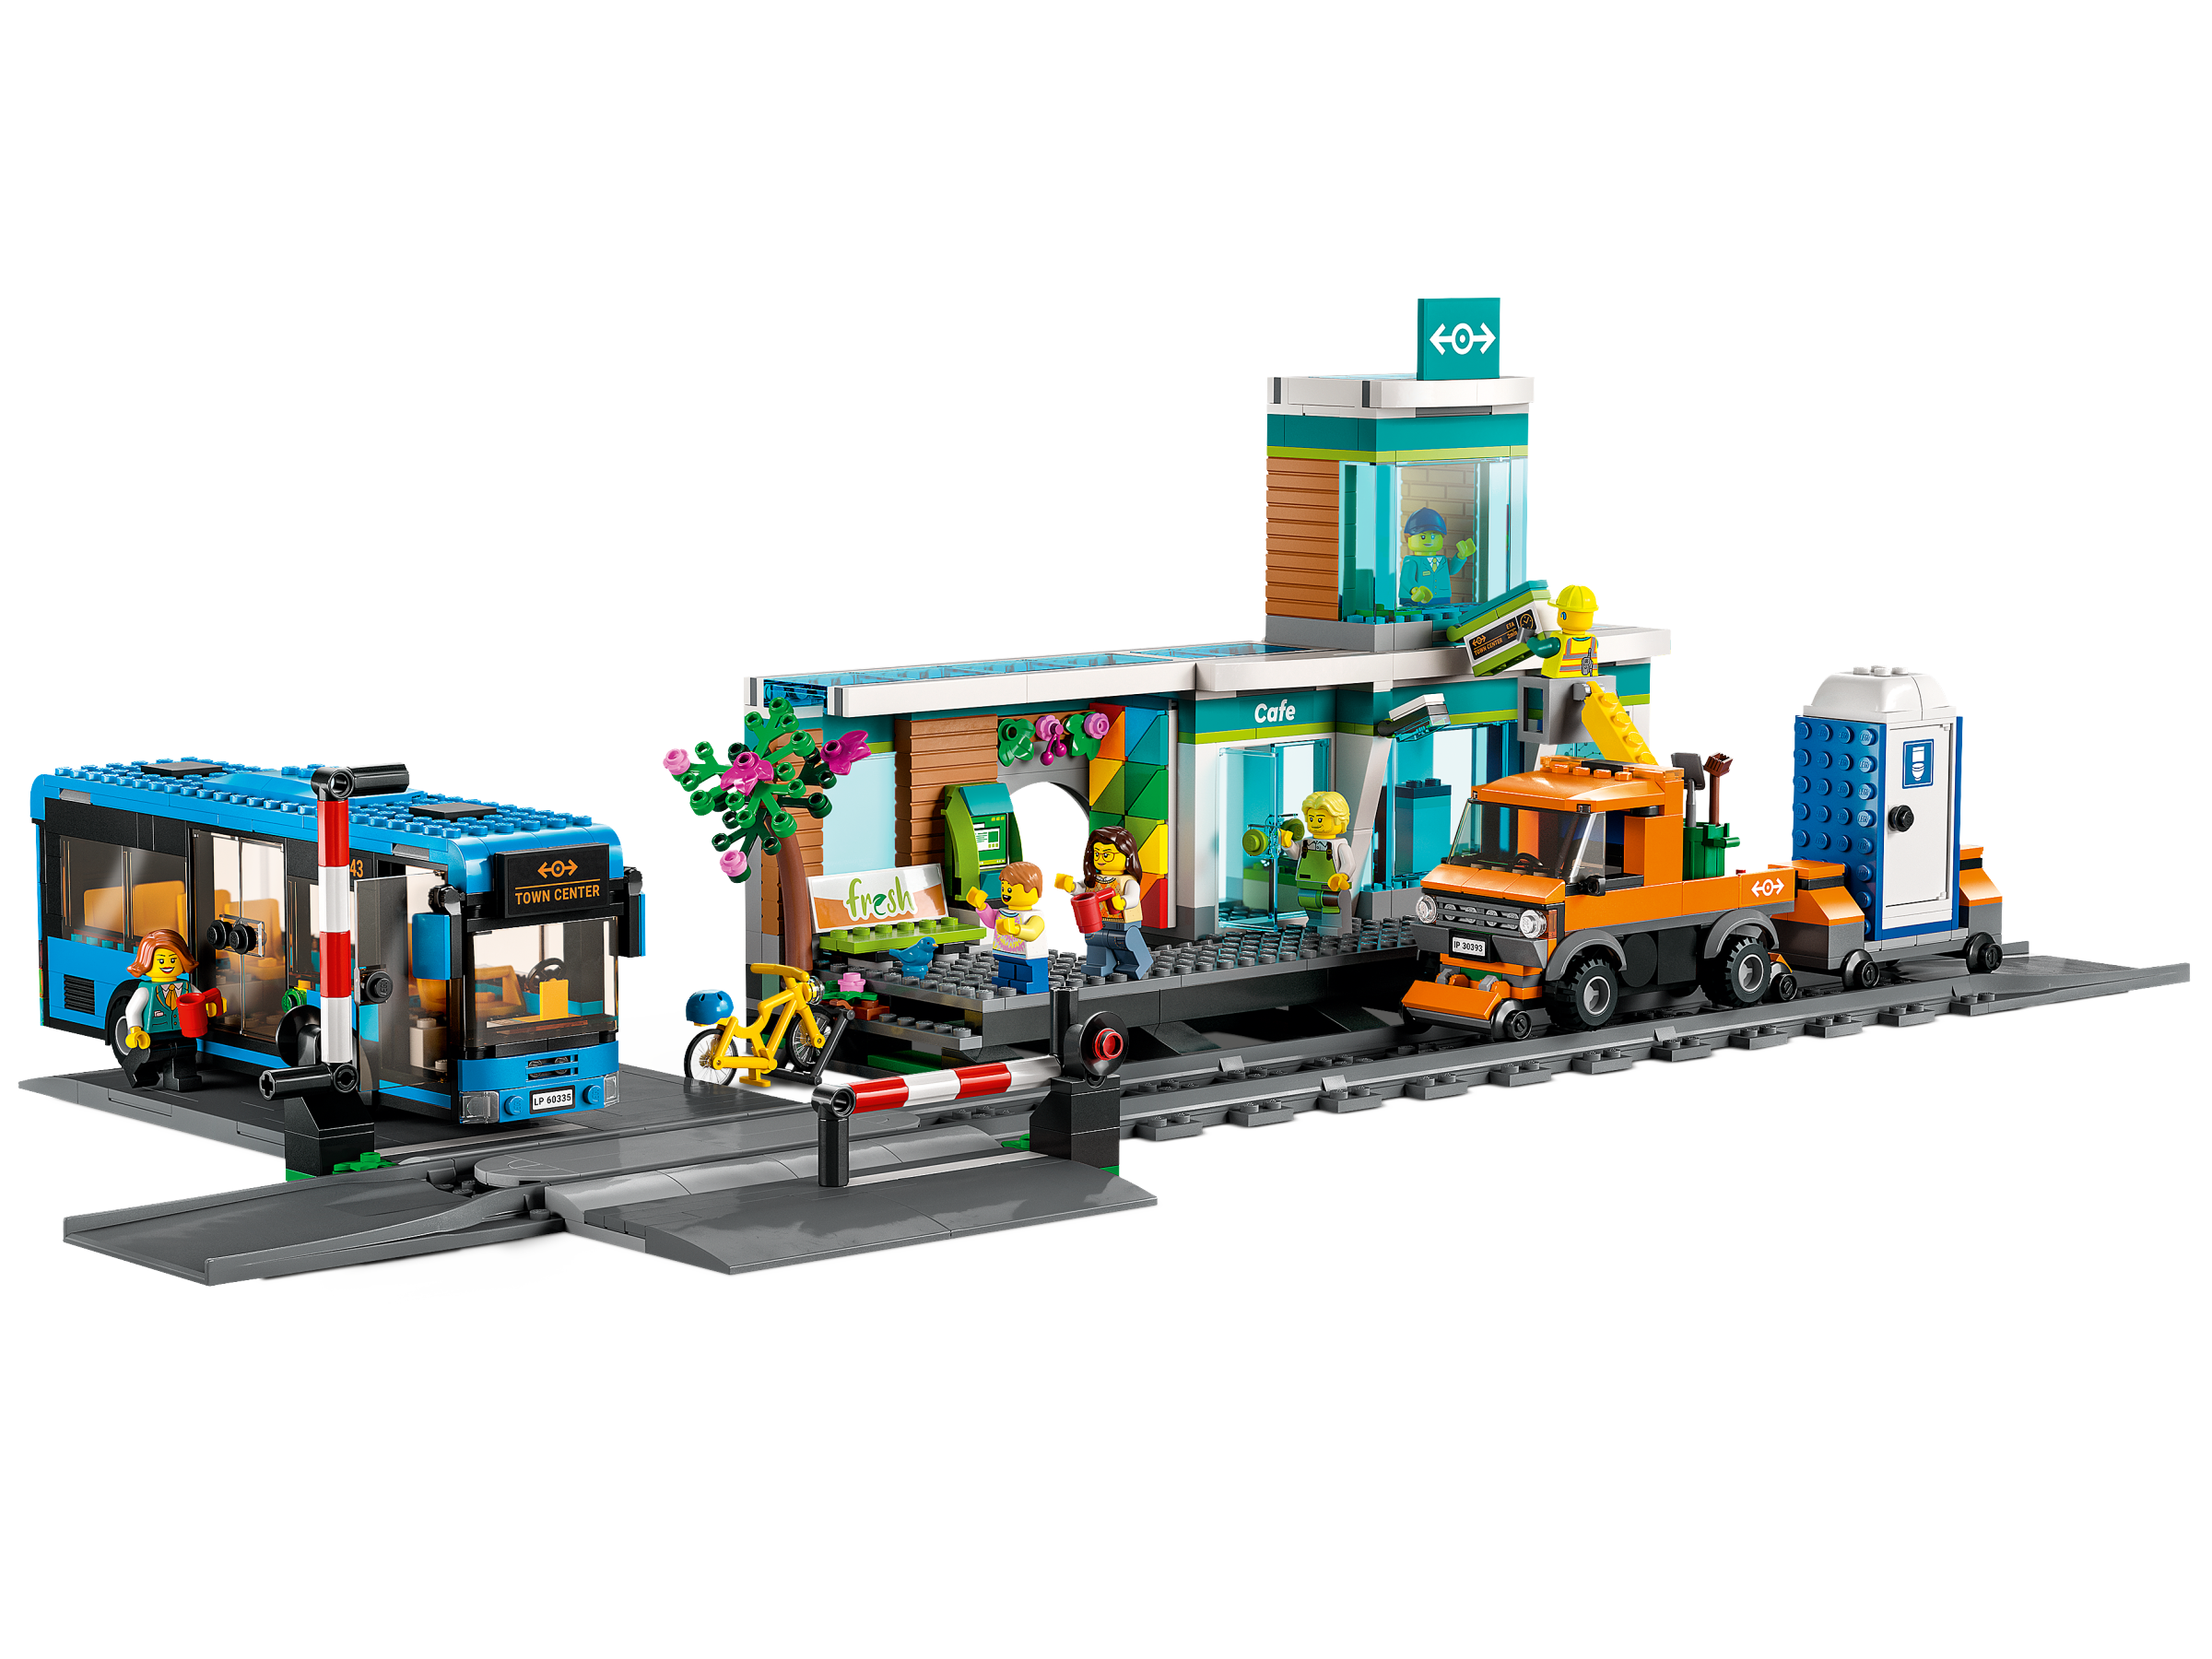 Train Station 60335 | City | Buy online at the Official LEGO® Shop US